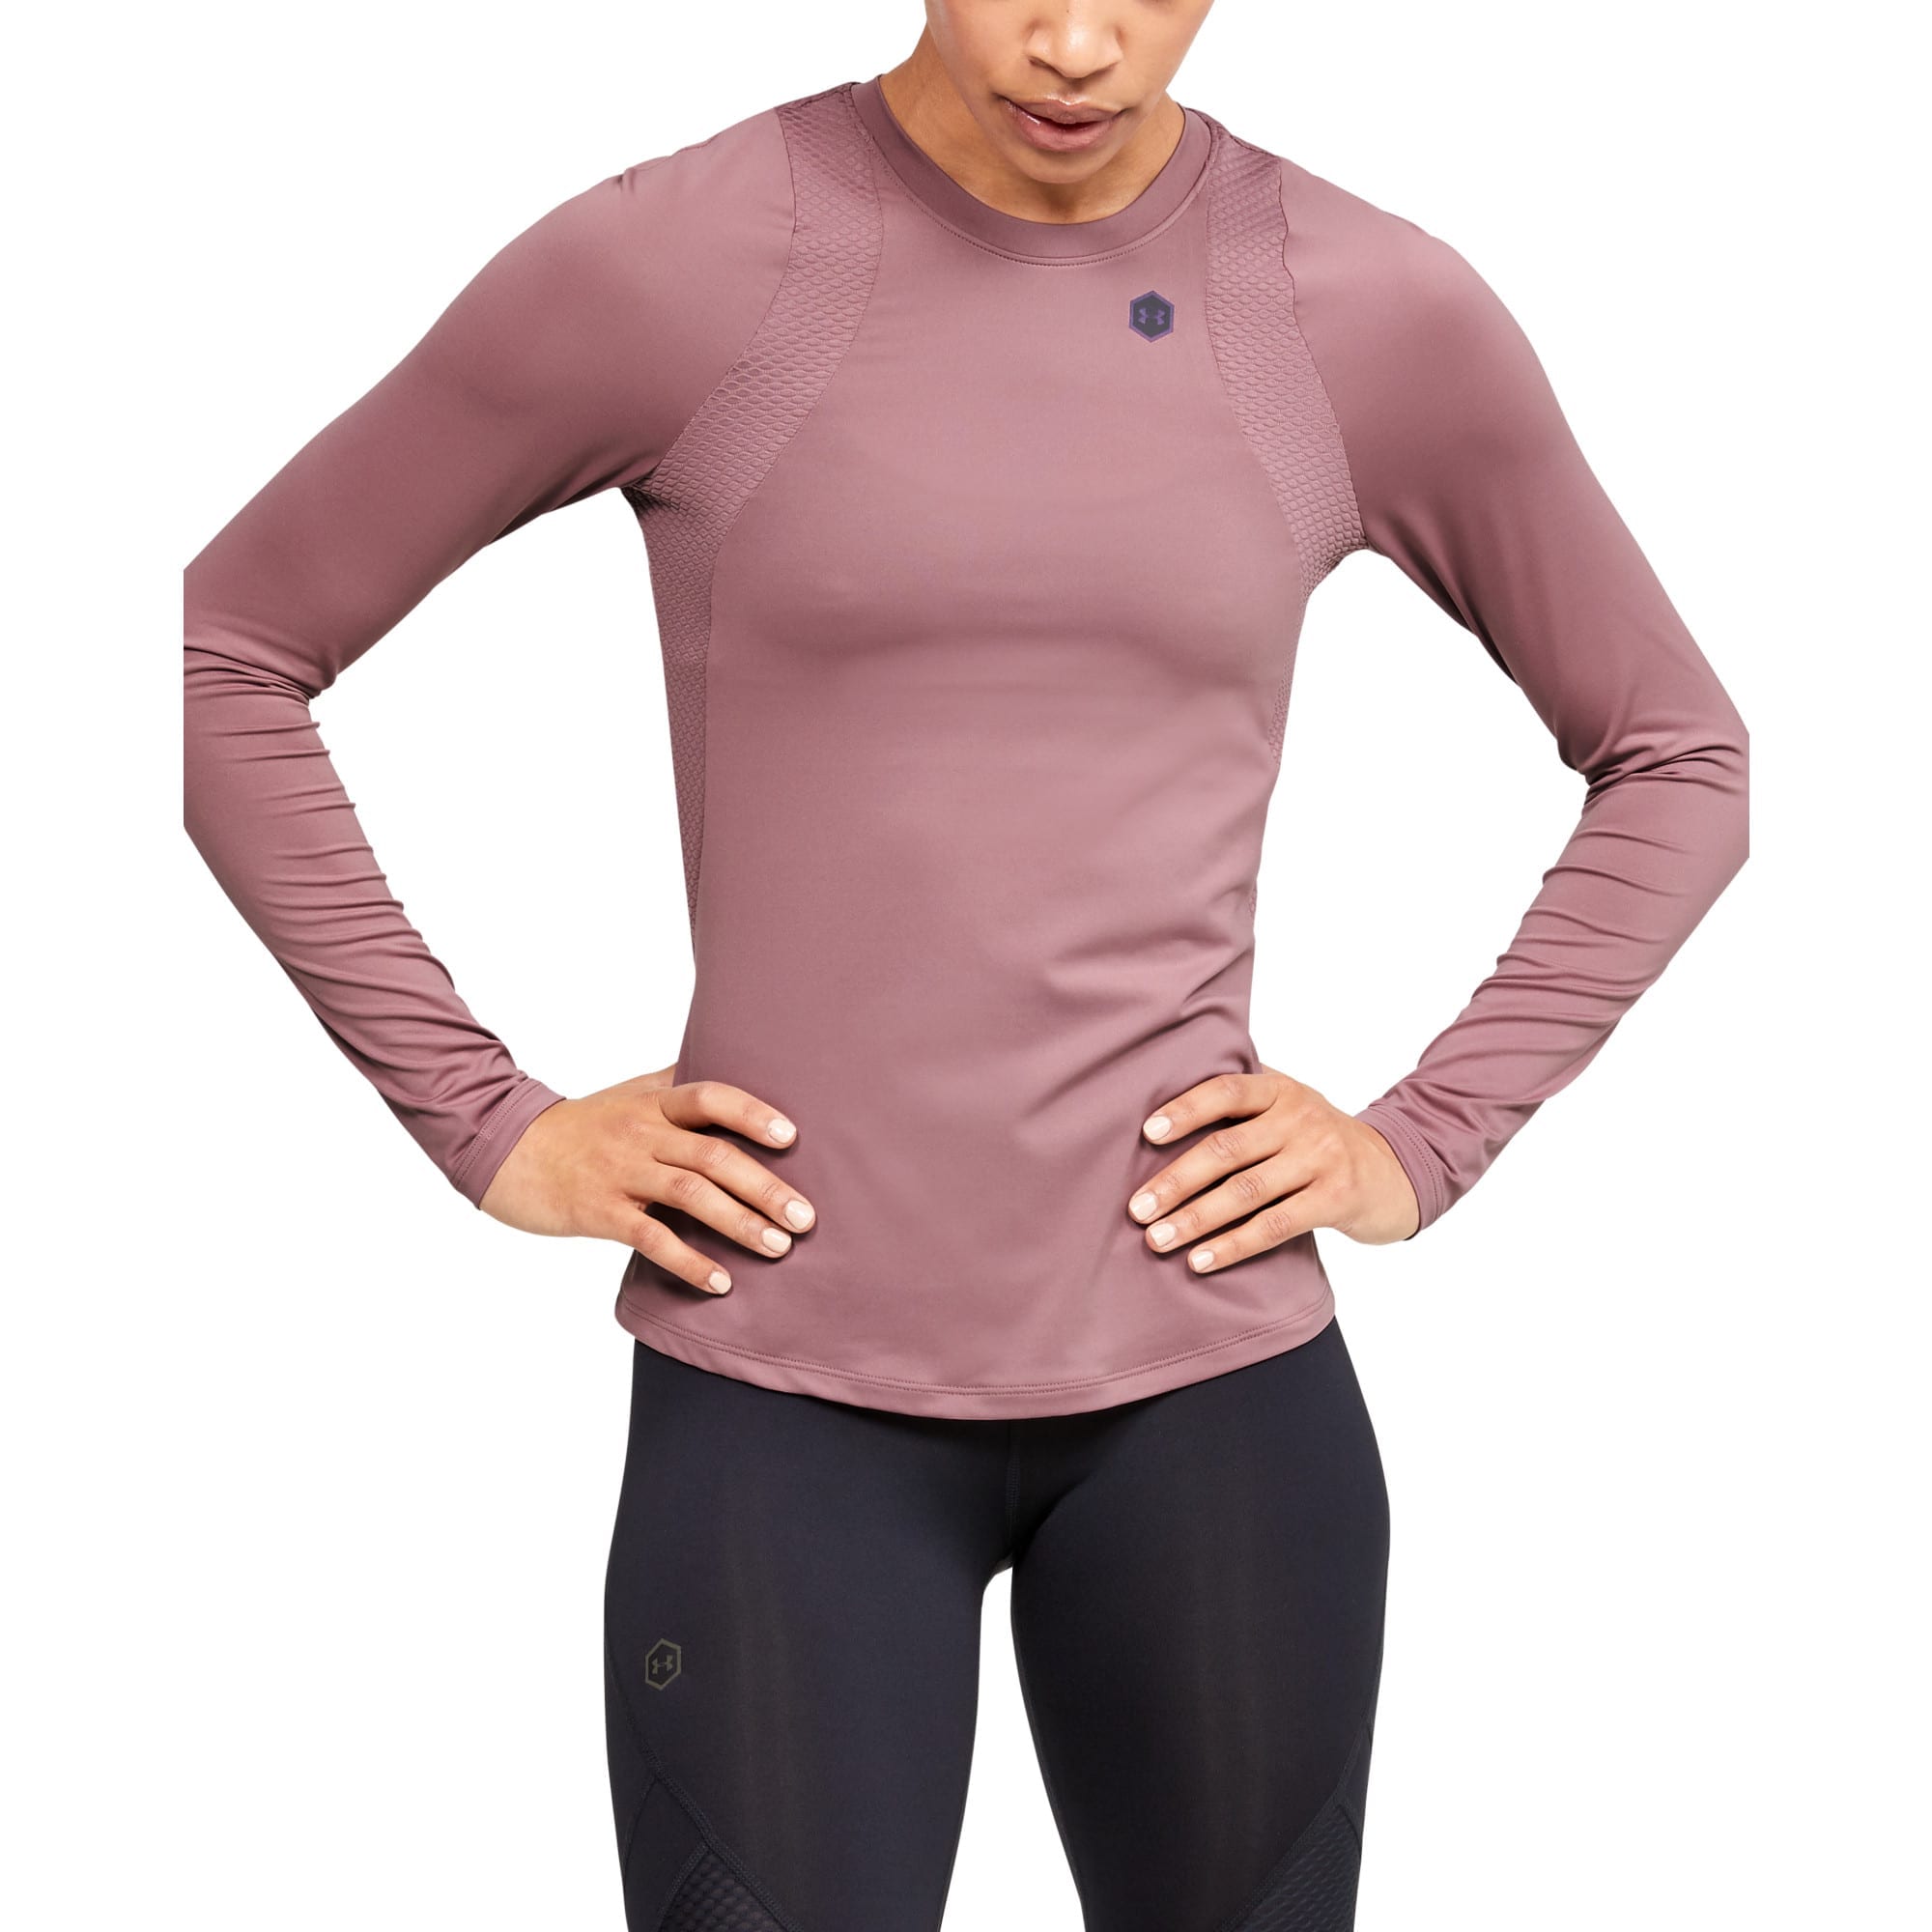 Kvinders Under Armour - Rush Longsleeve Fitted - Hushed Pink XL thumbnail